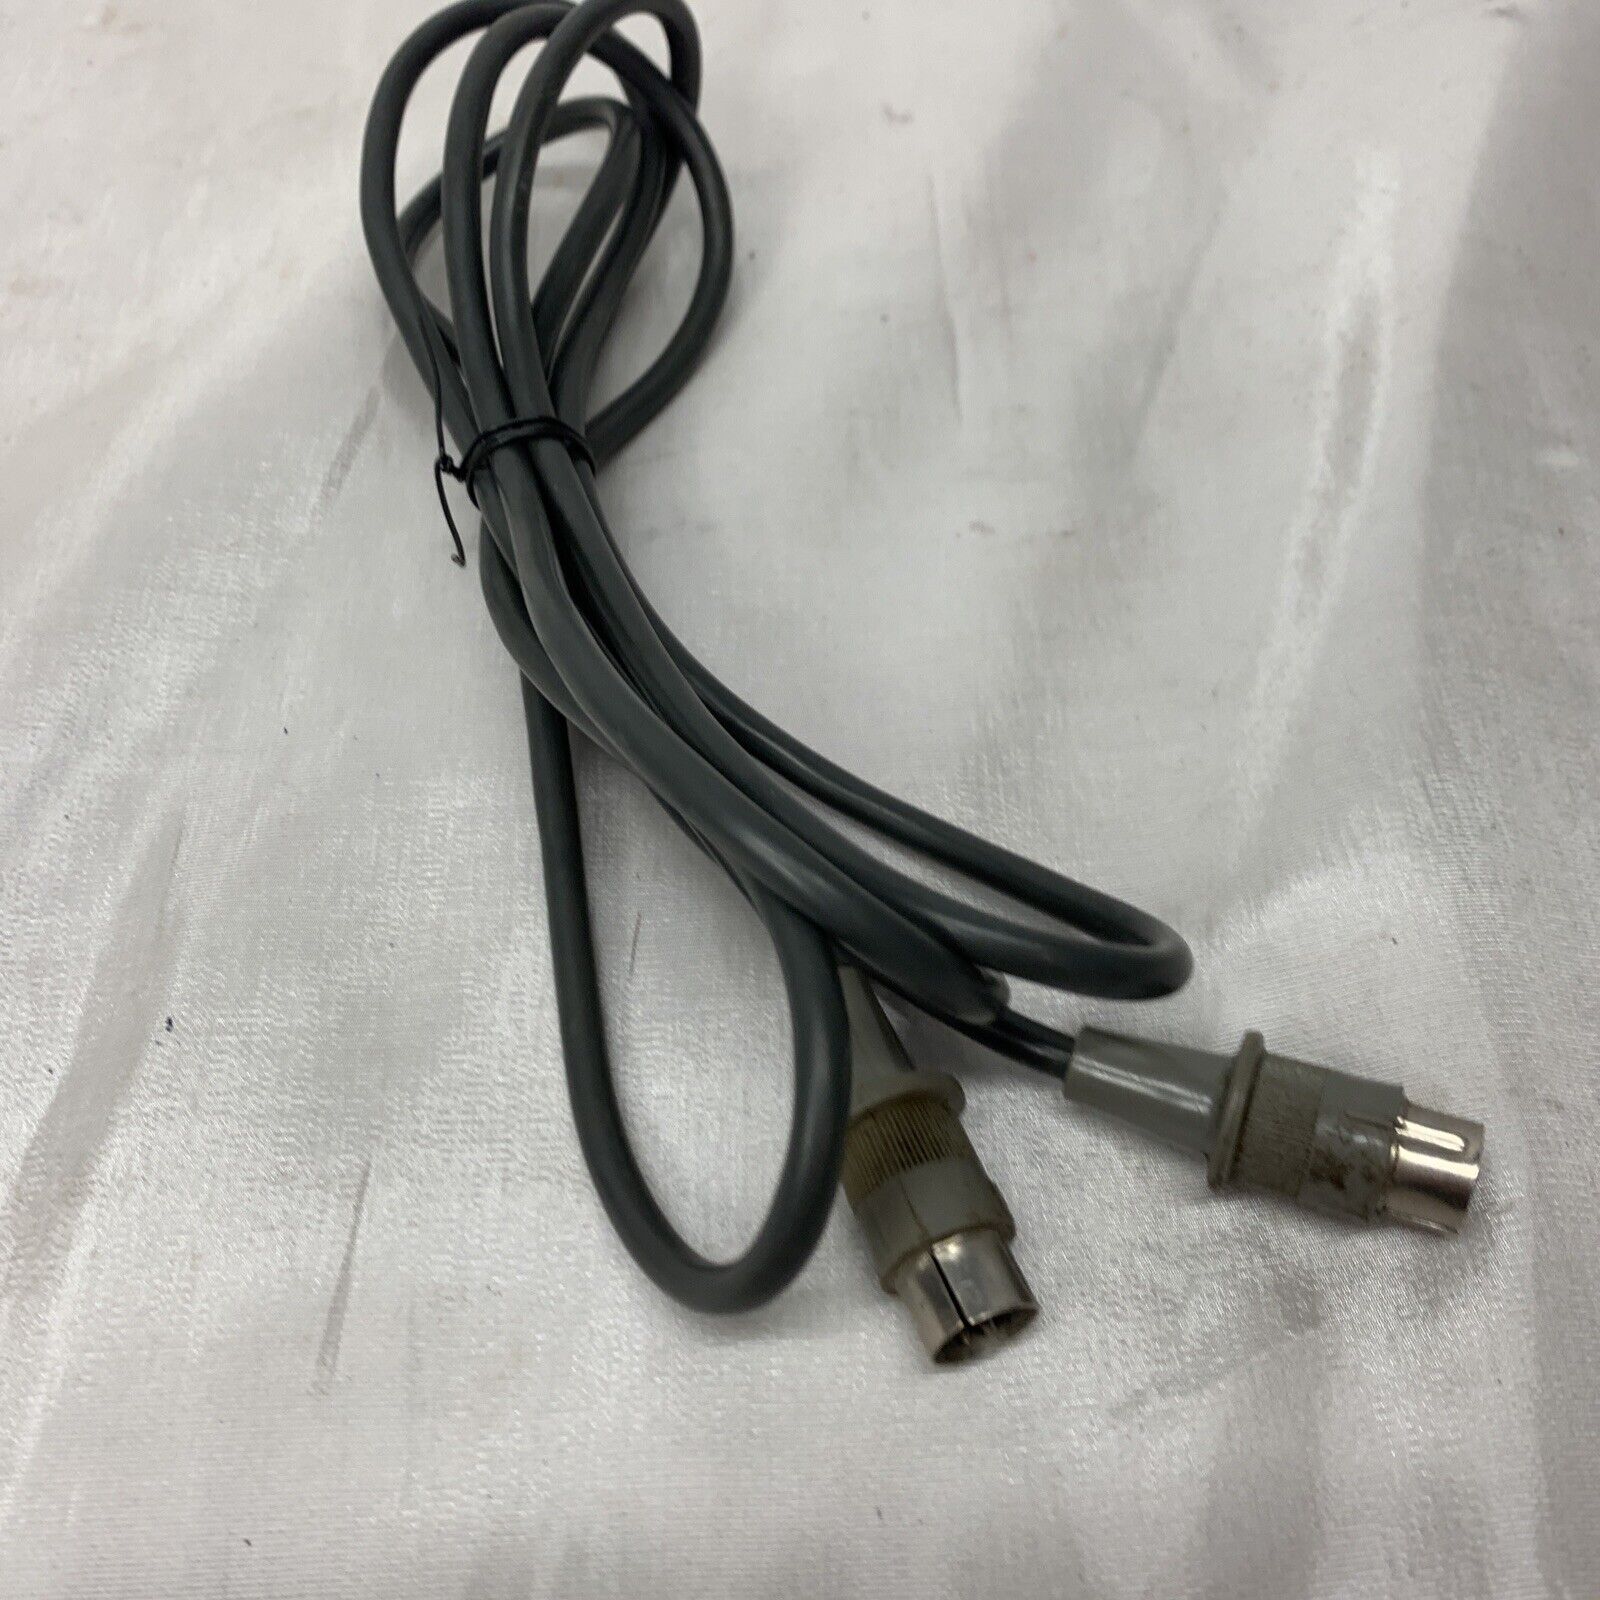 Vintage Sony 5-pin cable from the 1970s. Approximately 6-feet. Audio REC/PB